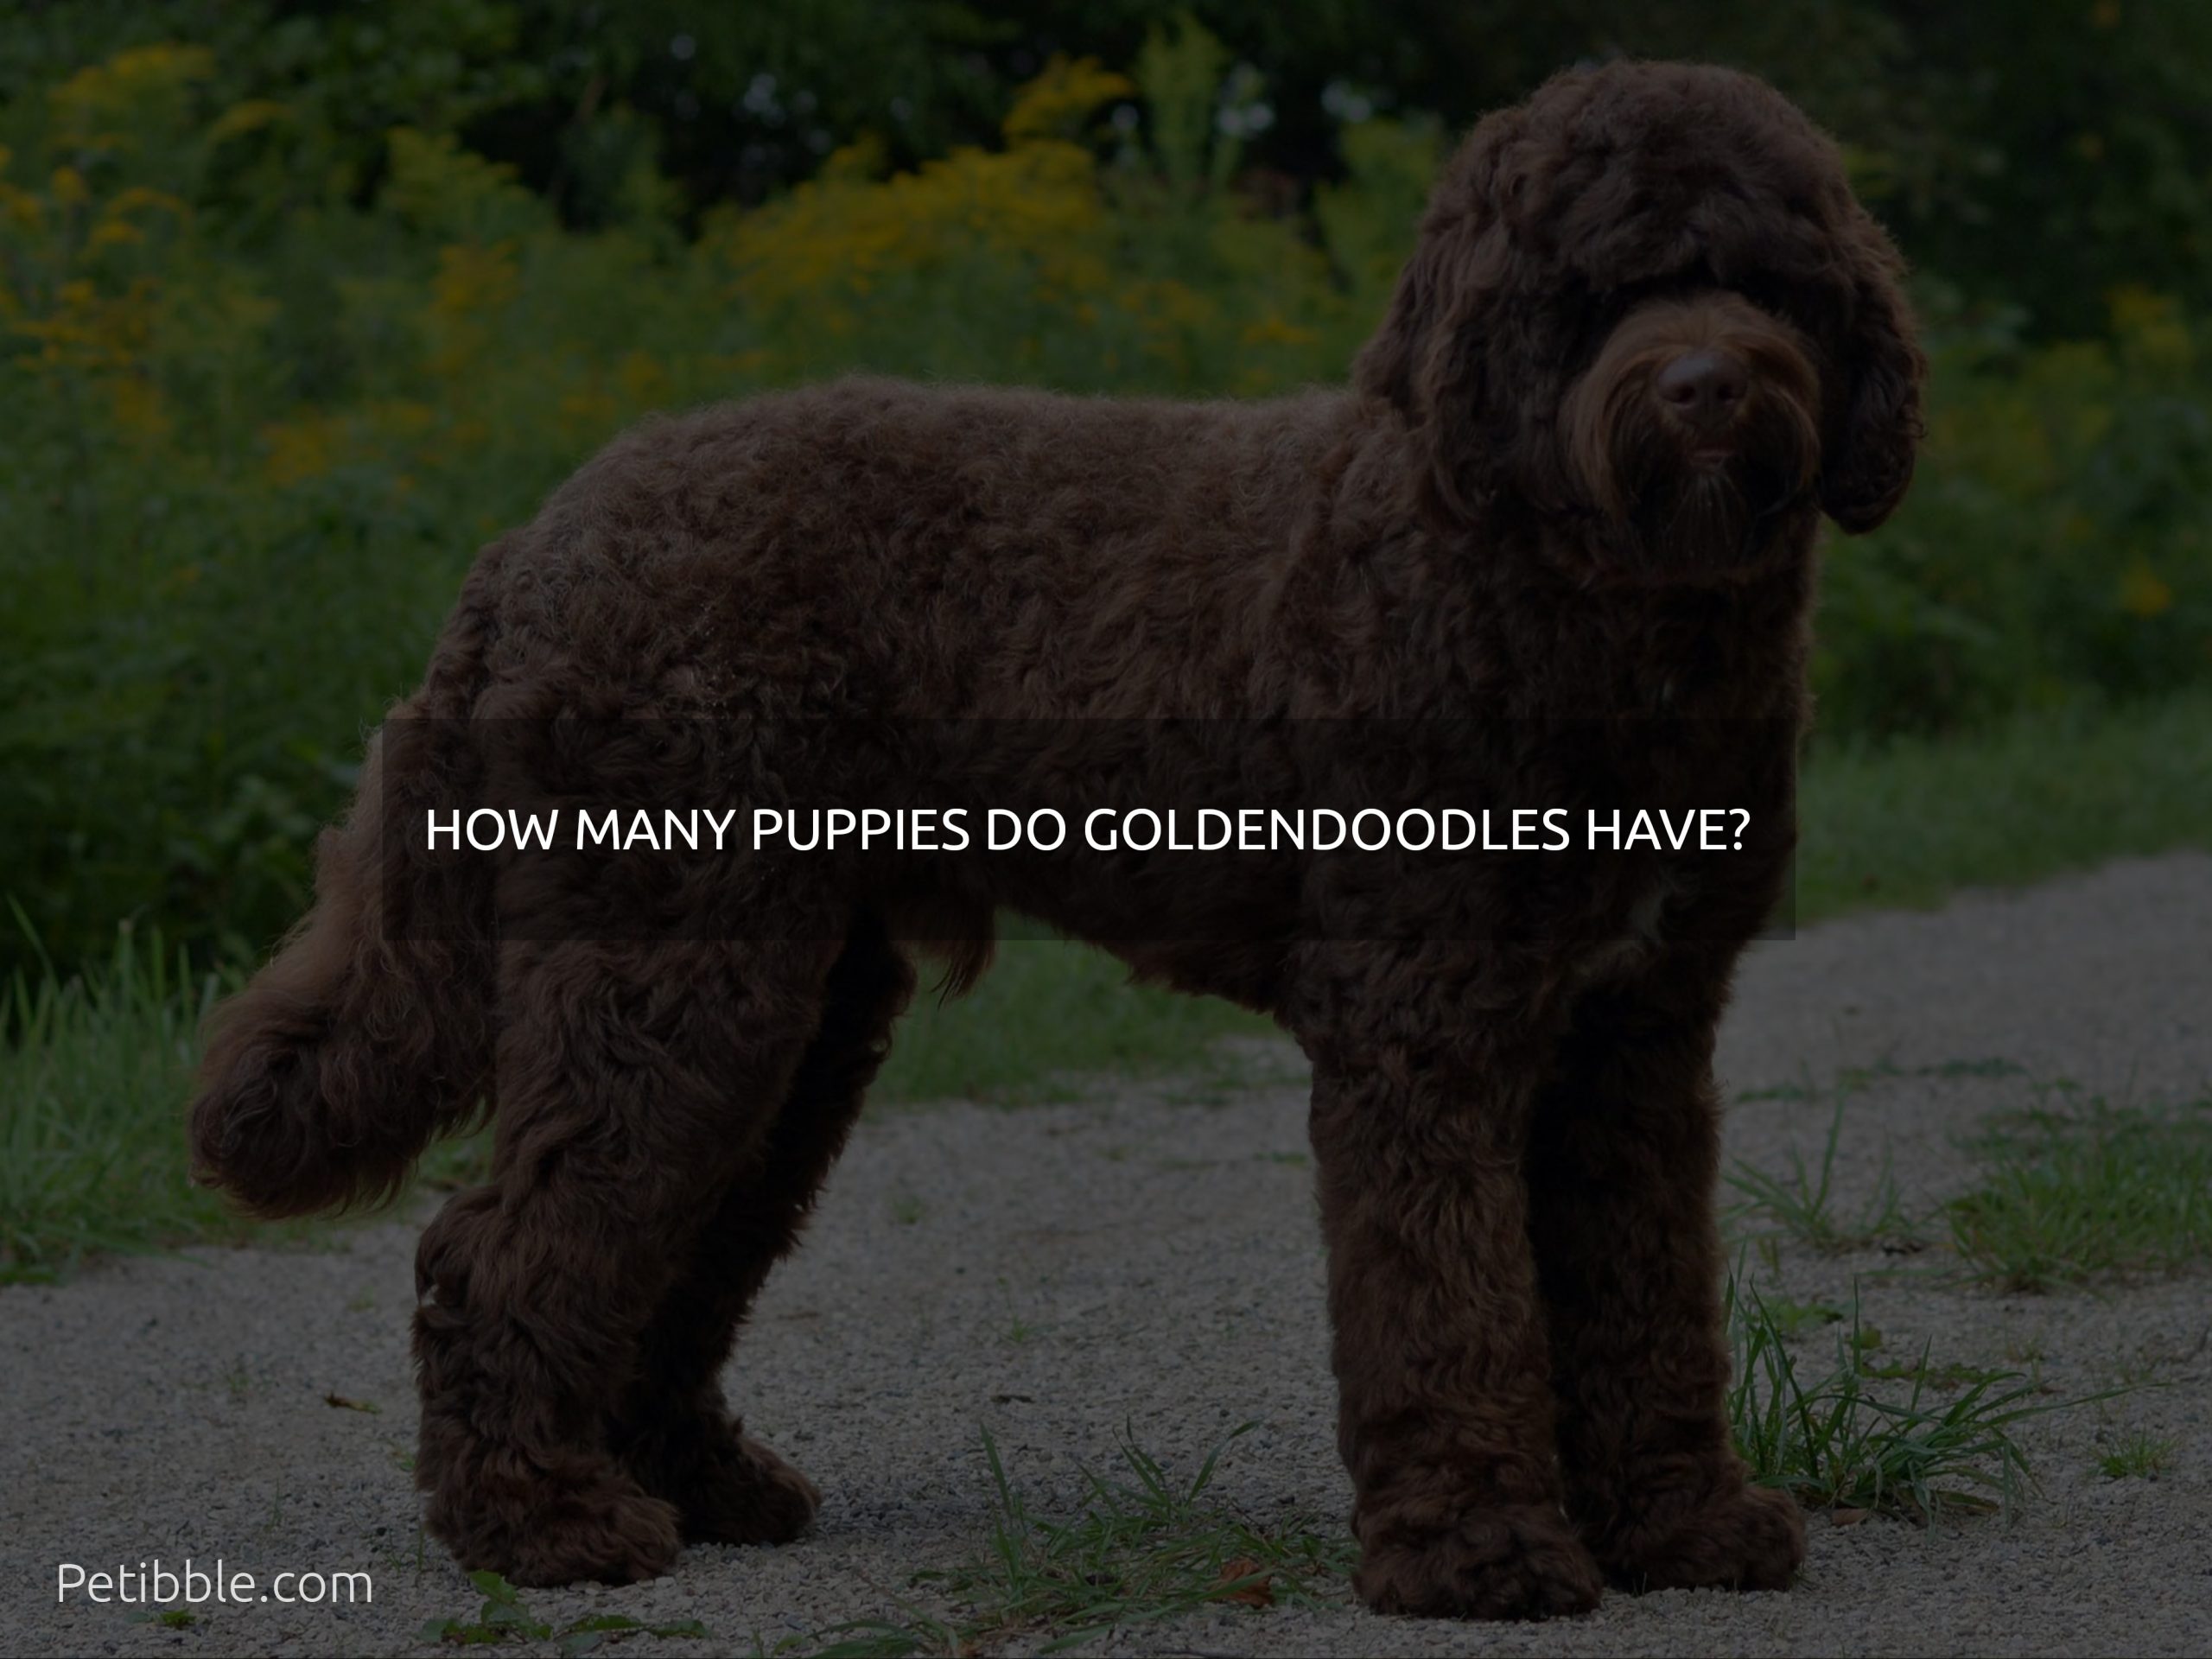 how many puppies do goldendoodles have?